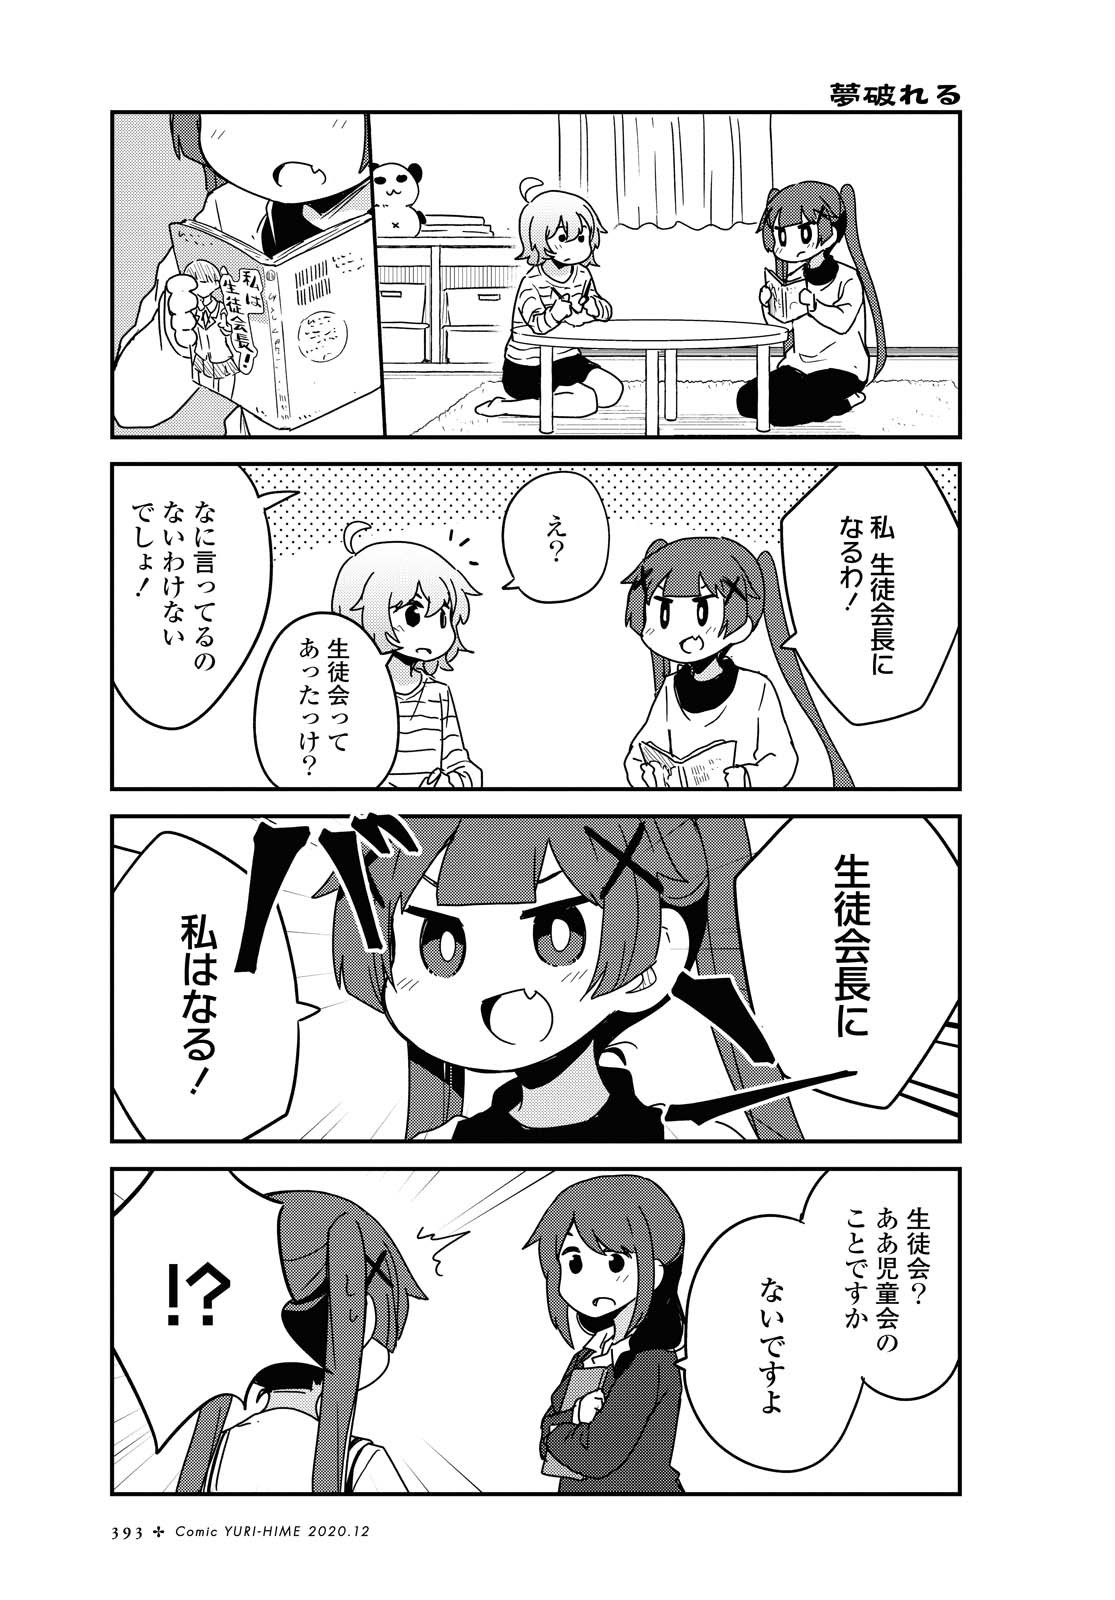 Wataten! An Angel Flew Down to Me 私に天使が舞い降りた！ 第72話 - Page 1